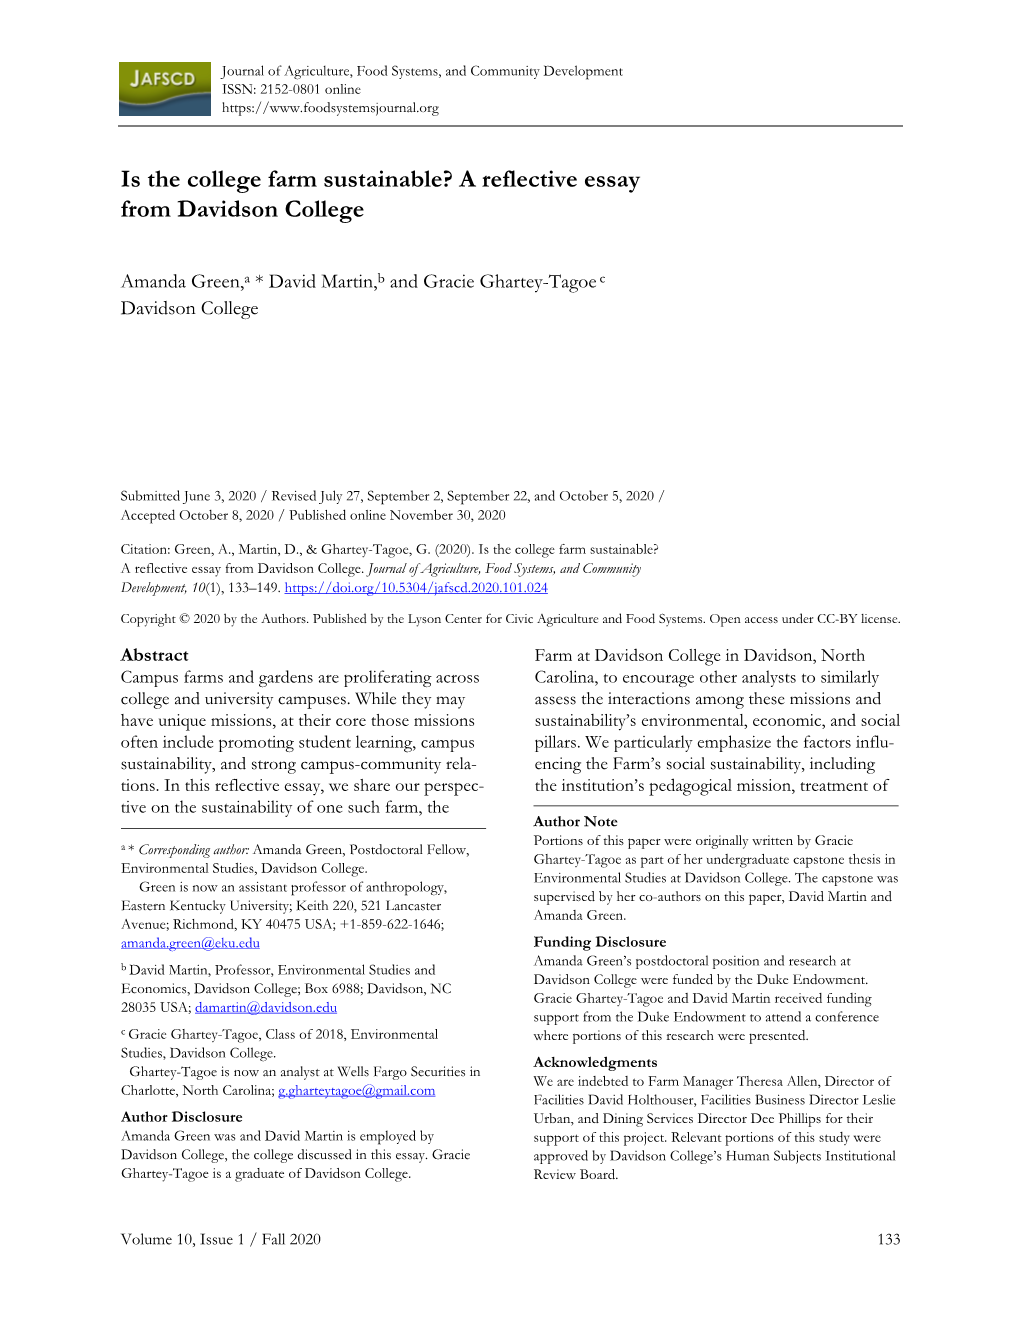 Is the College Farm Sustainable? a Reflective Essay from Davidson College